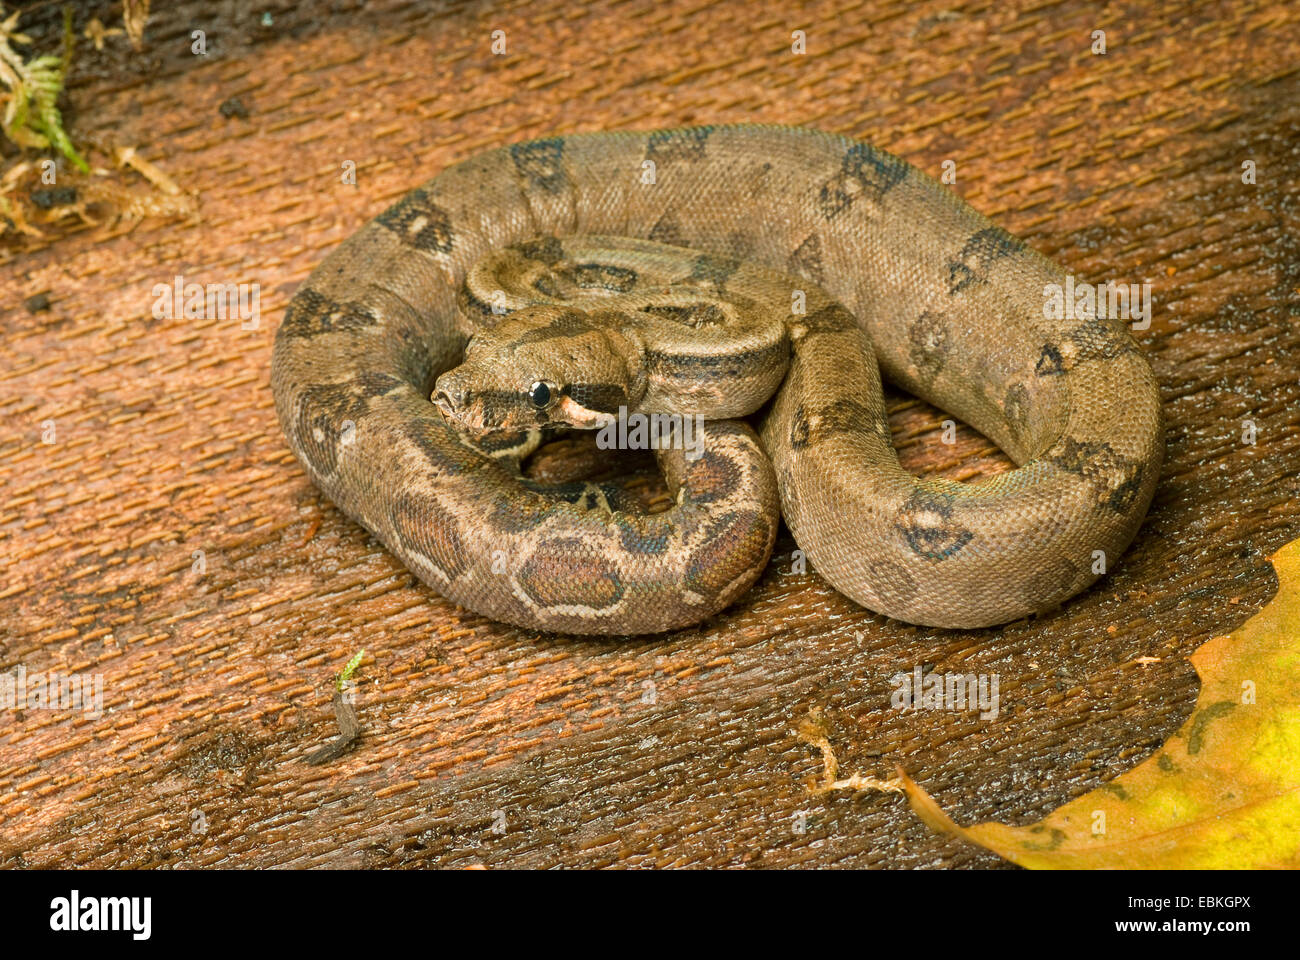 Red-tailed Boa constrictor (Boa constrictor), rolled-up Banque D'Images